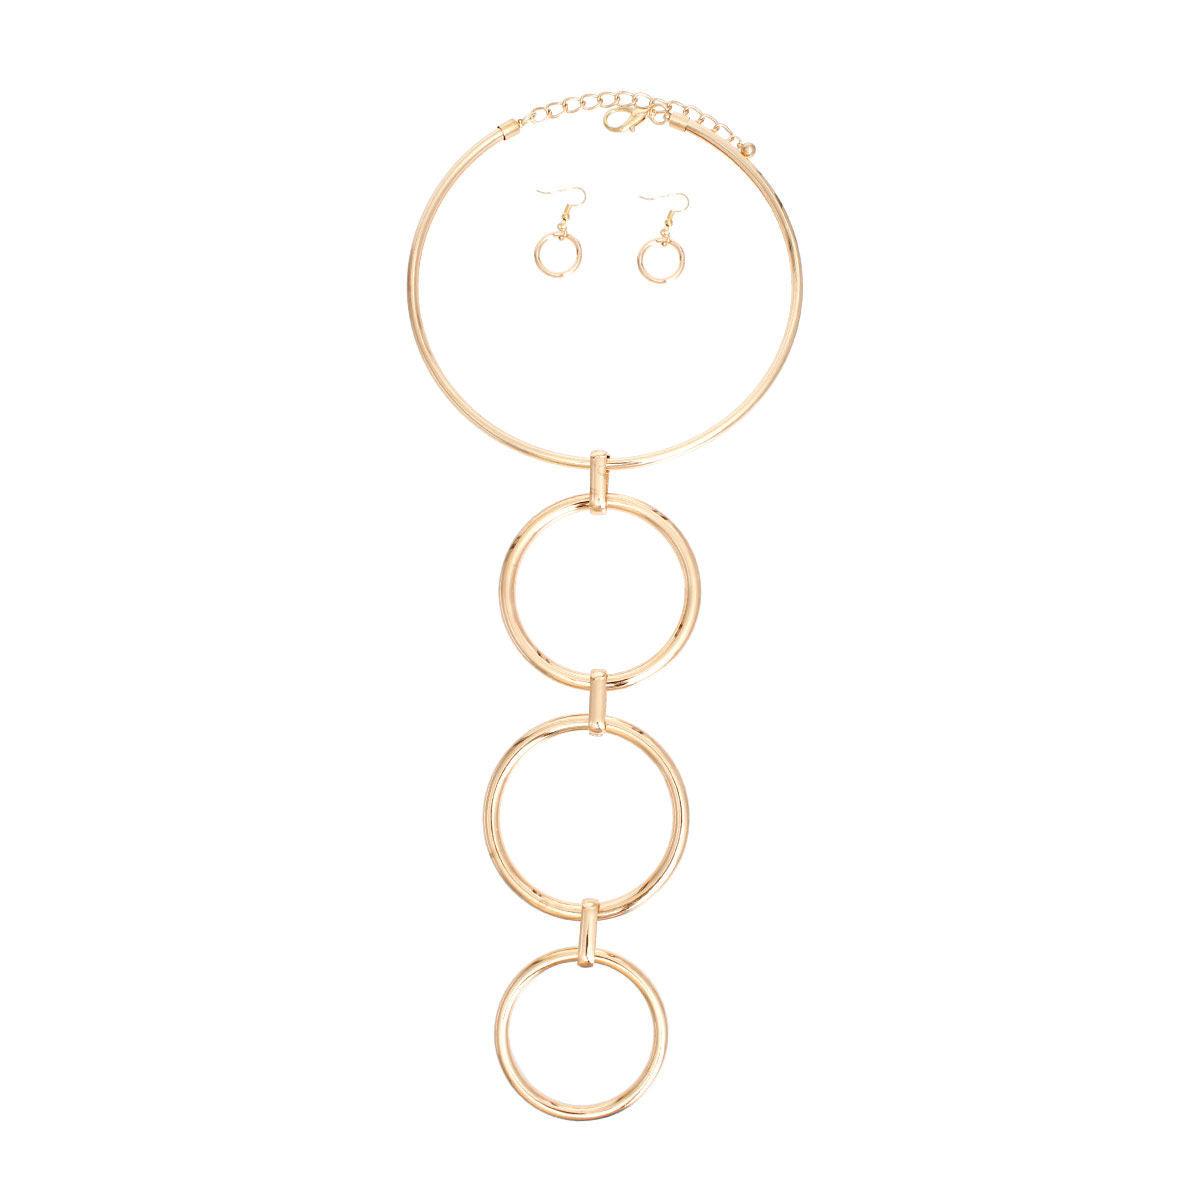 Gold Linked Rings Necklace Set: Modernist Fashion Jewelry